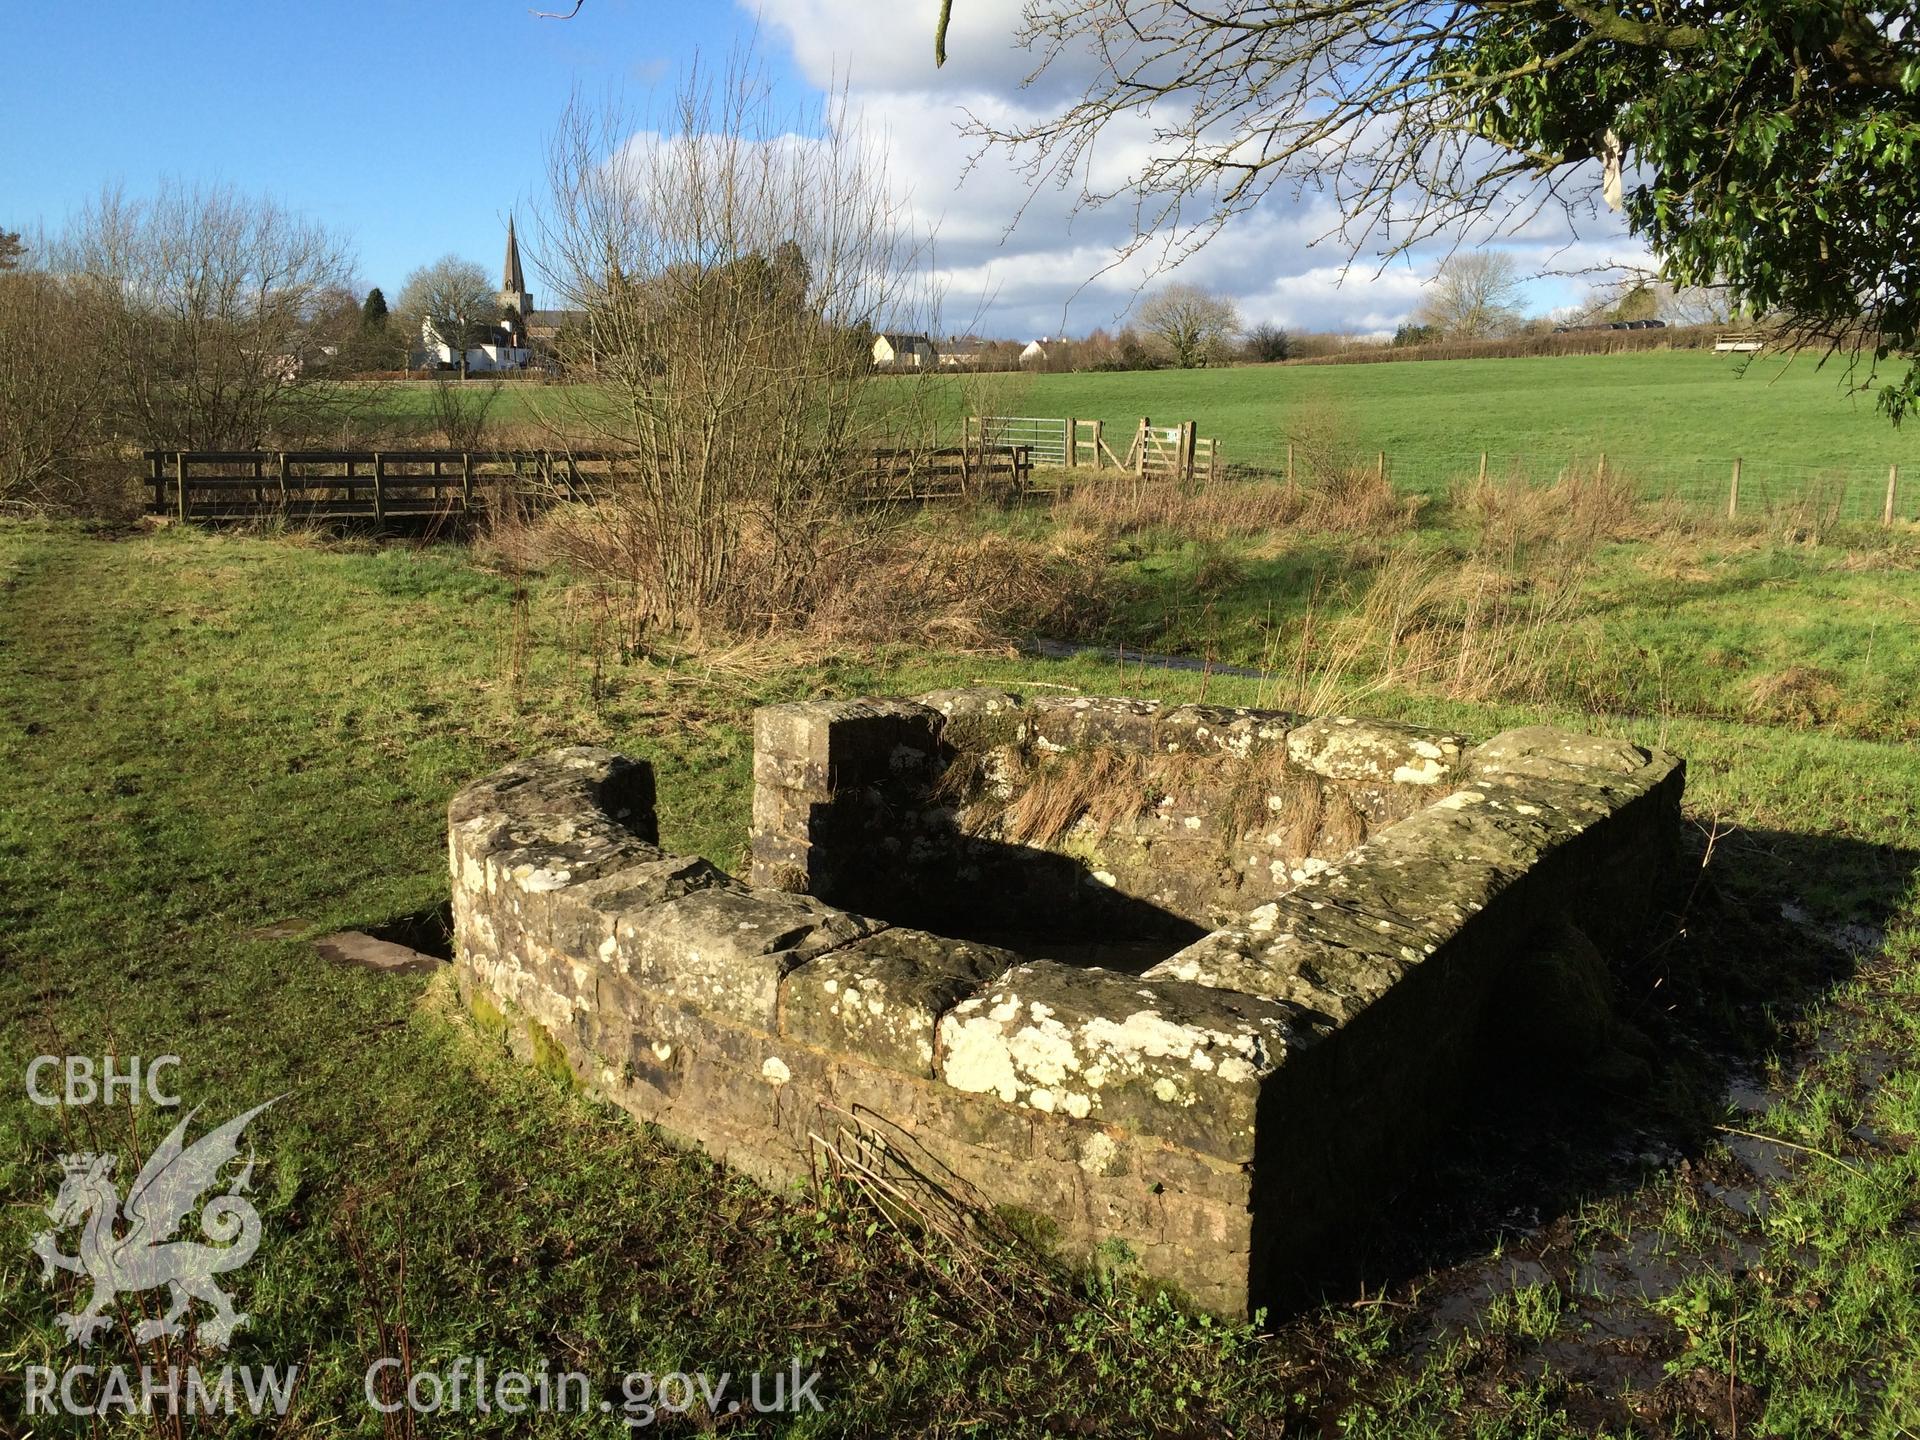 Colour photo showing St Anne's Well, taken by Paul R. Davis, 10th February 2016.